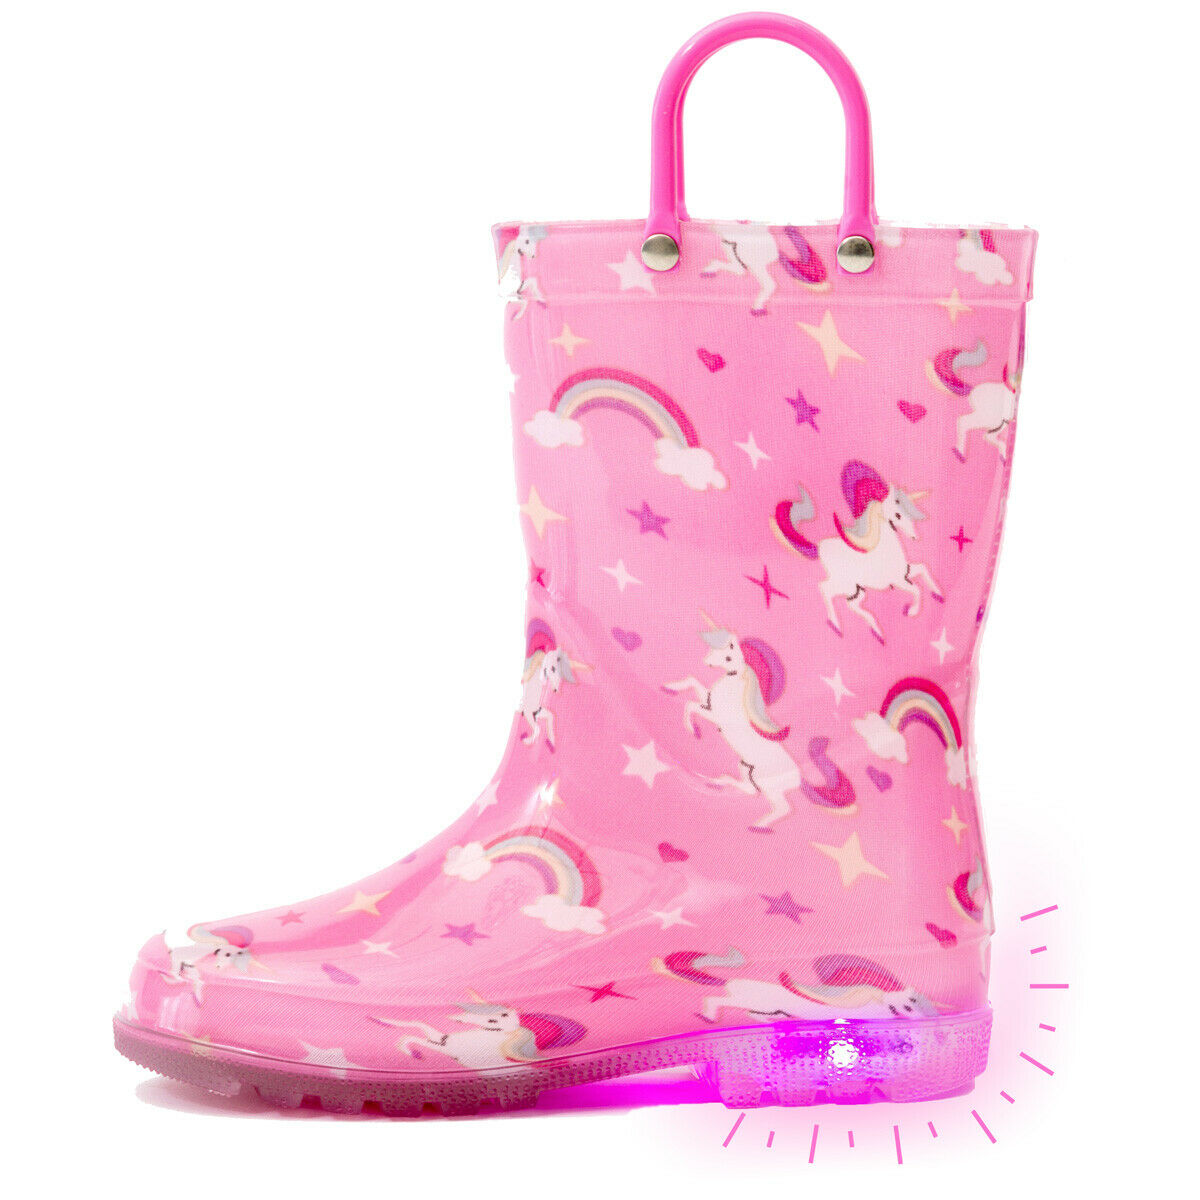 Outee Toddler Kids Cute Print Light Up Rain Boots Variation Flashing In Rain